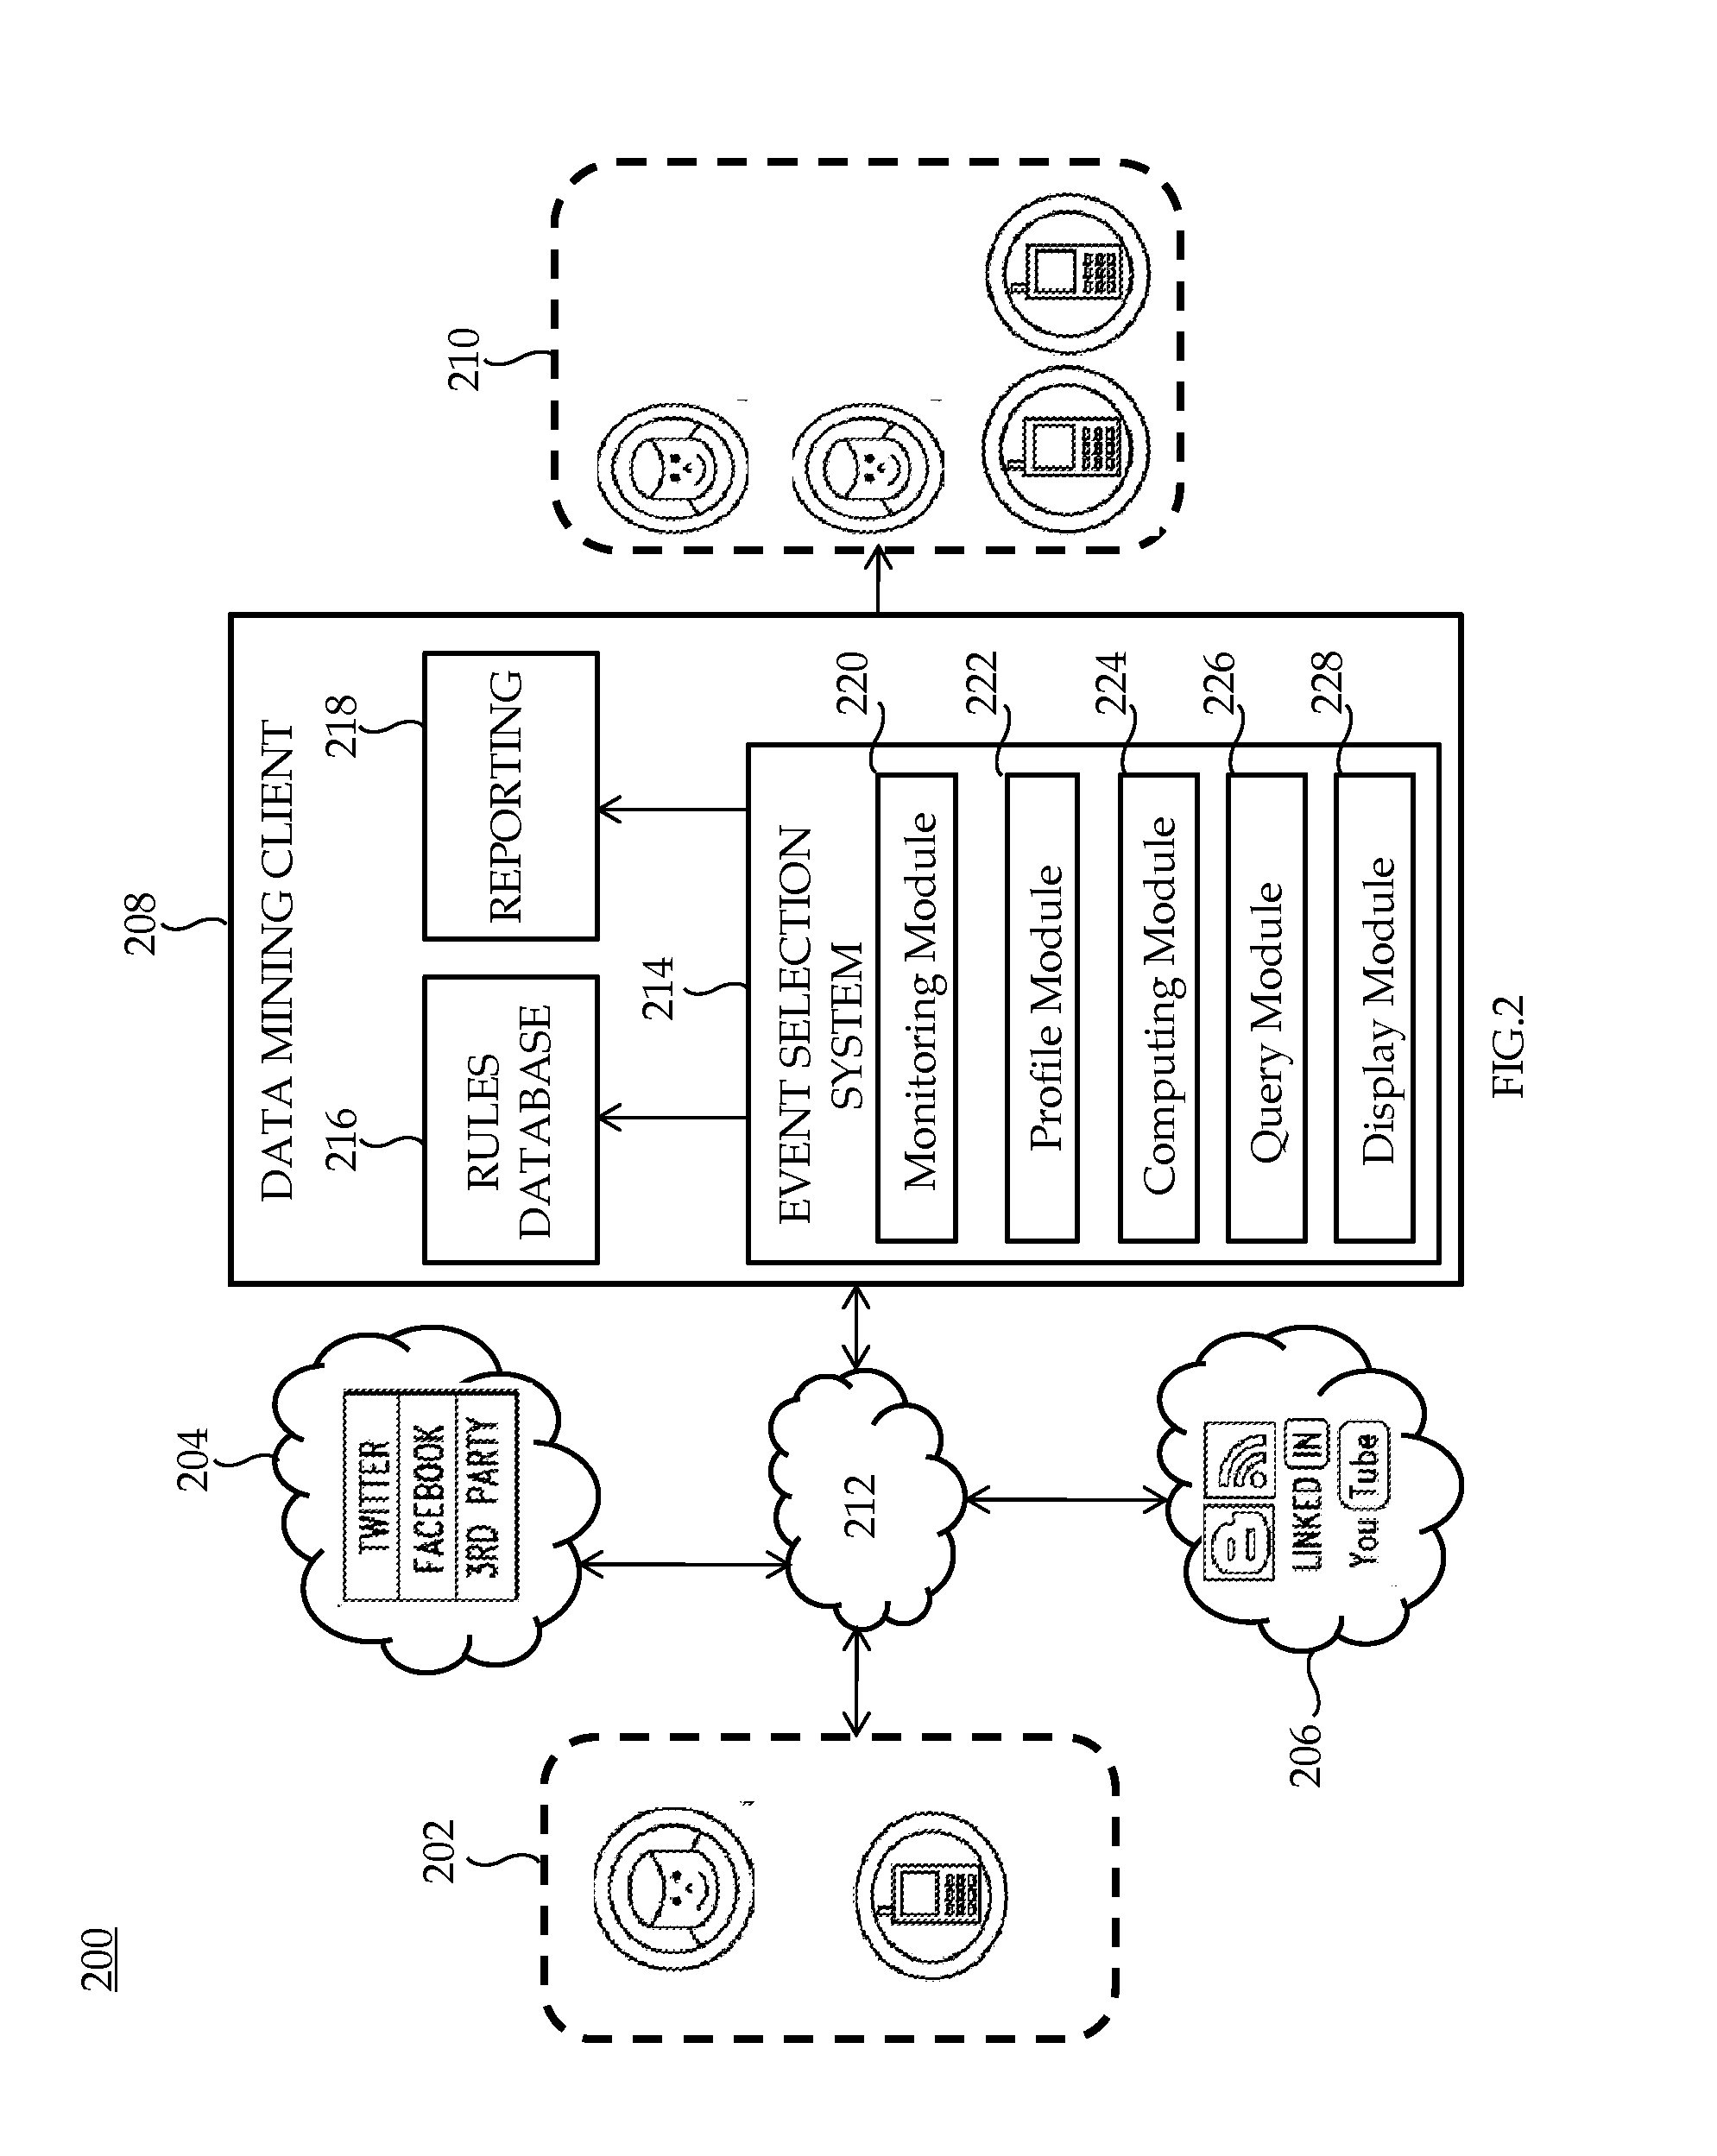 System and method for detecting and analyzing user migration in public social networks